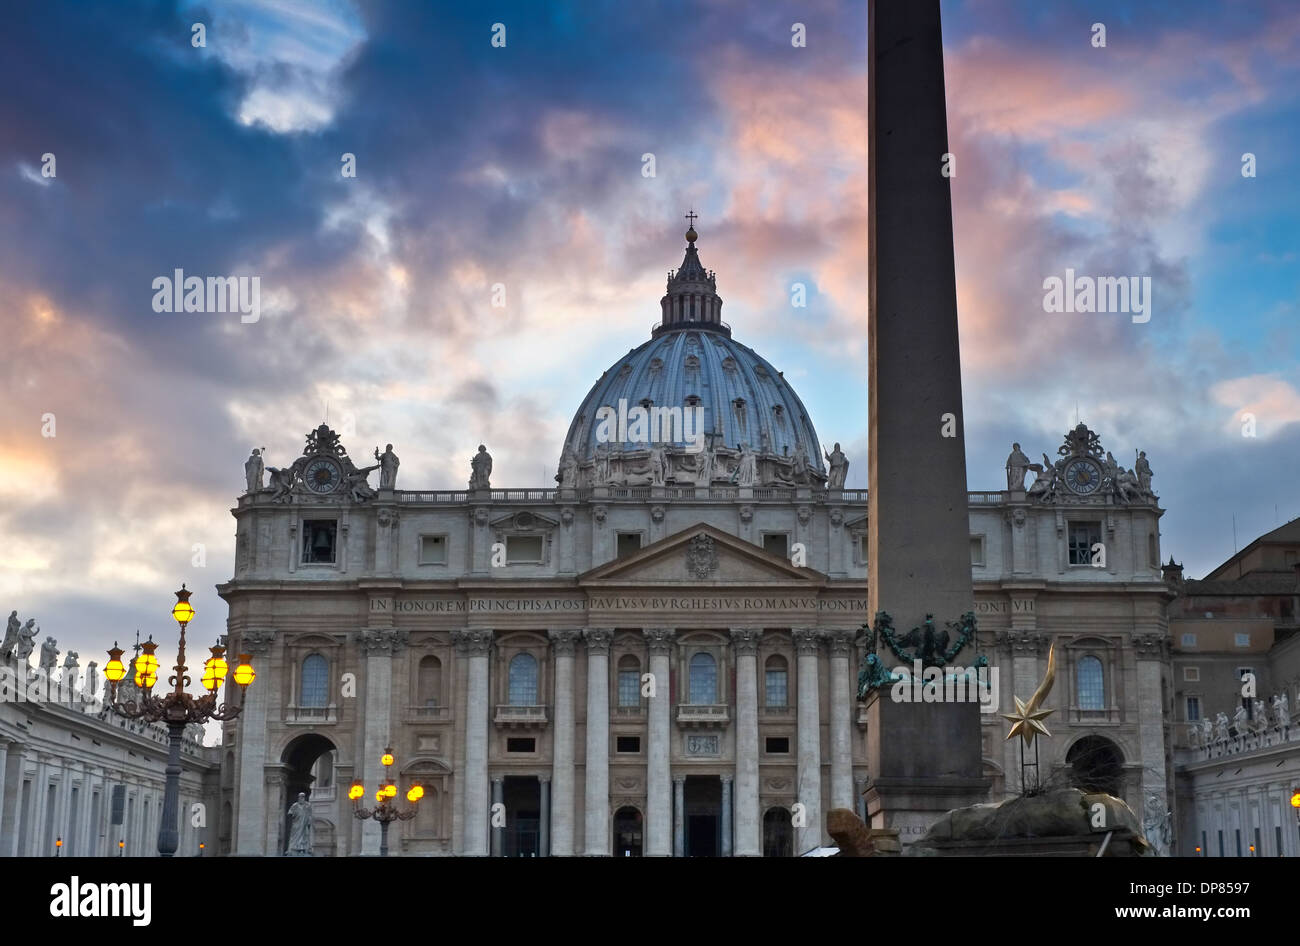 St Peter's Basilica in Vatican Rome Italy Stock Photo